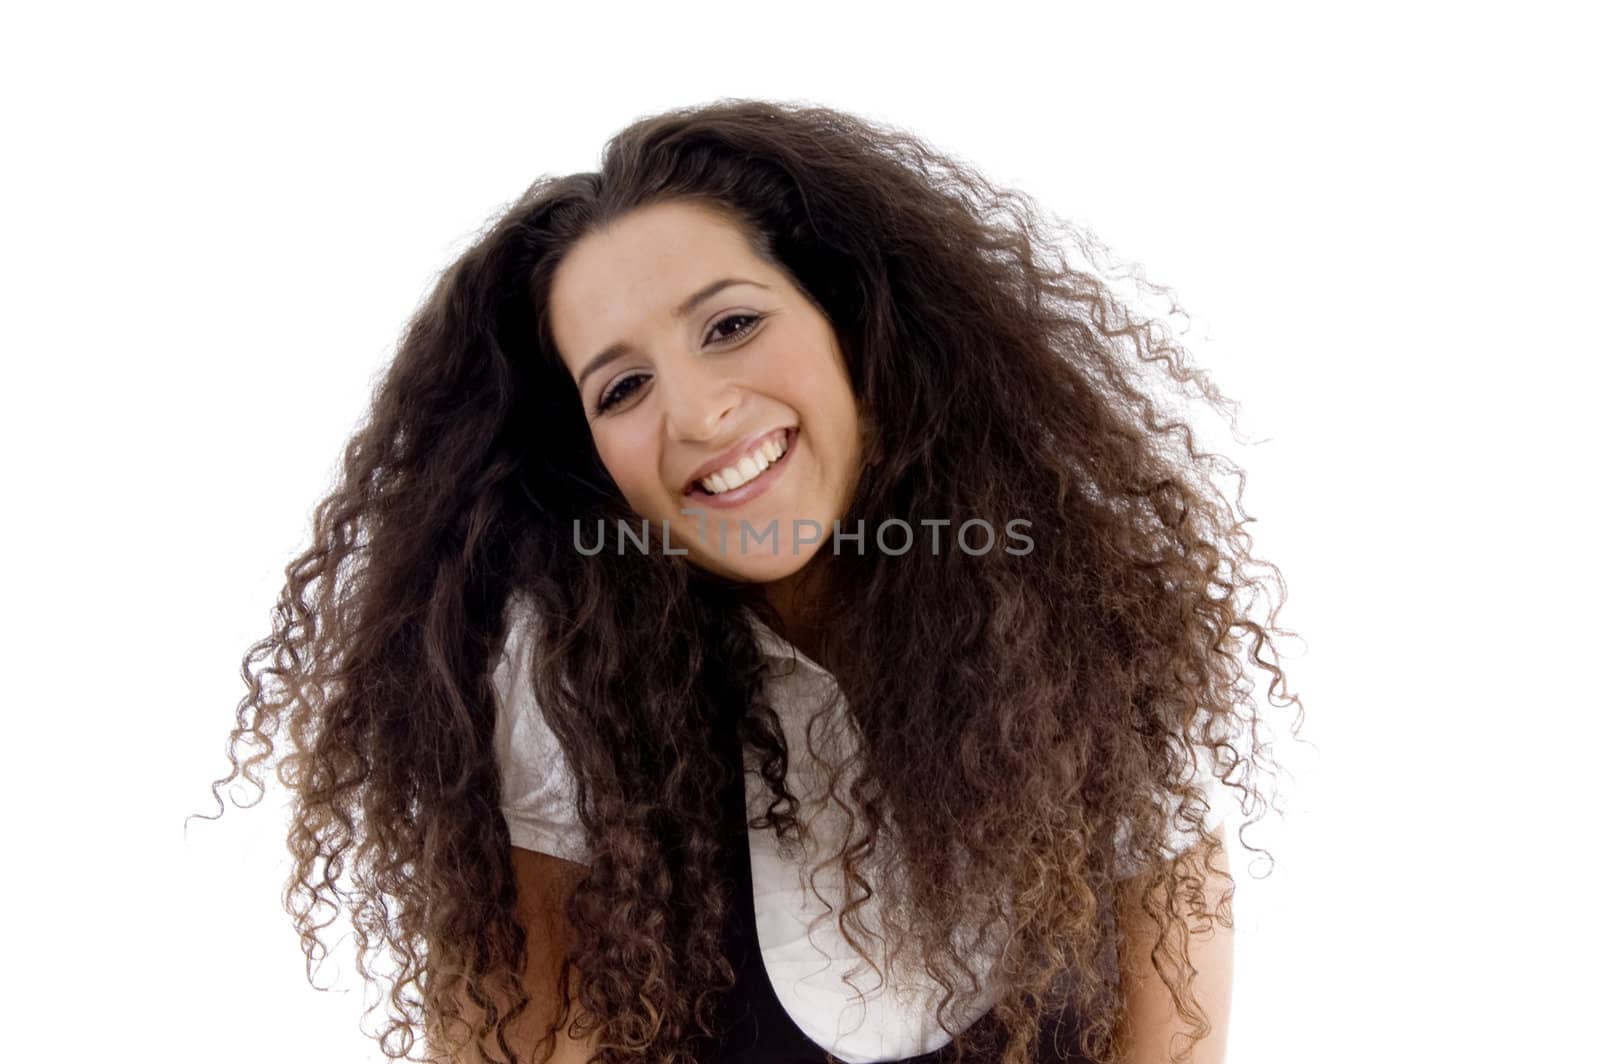 hispanic female posing with curly hairs by imagerymajestic